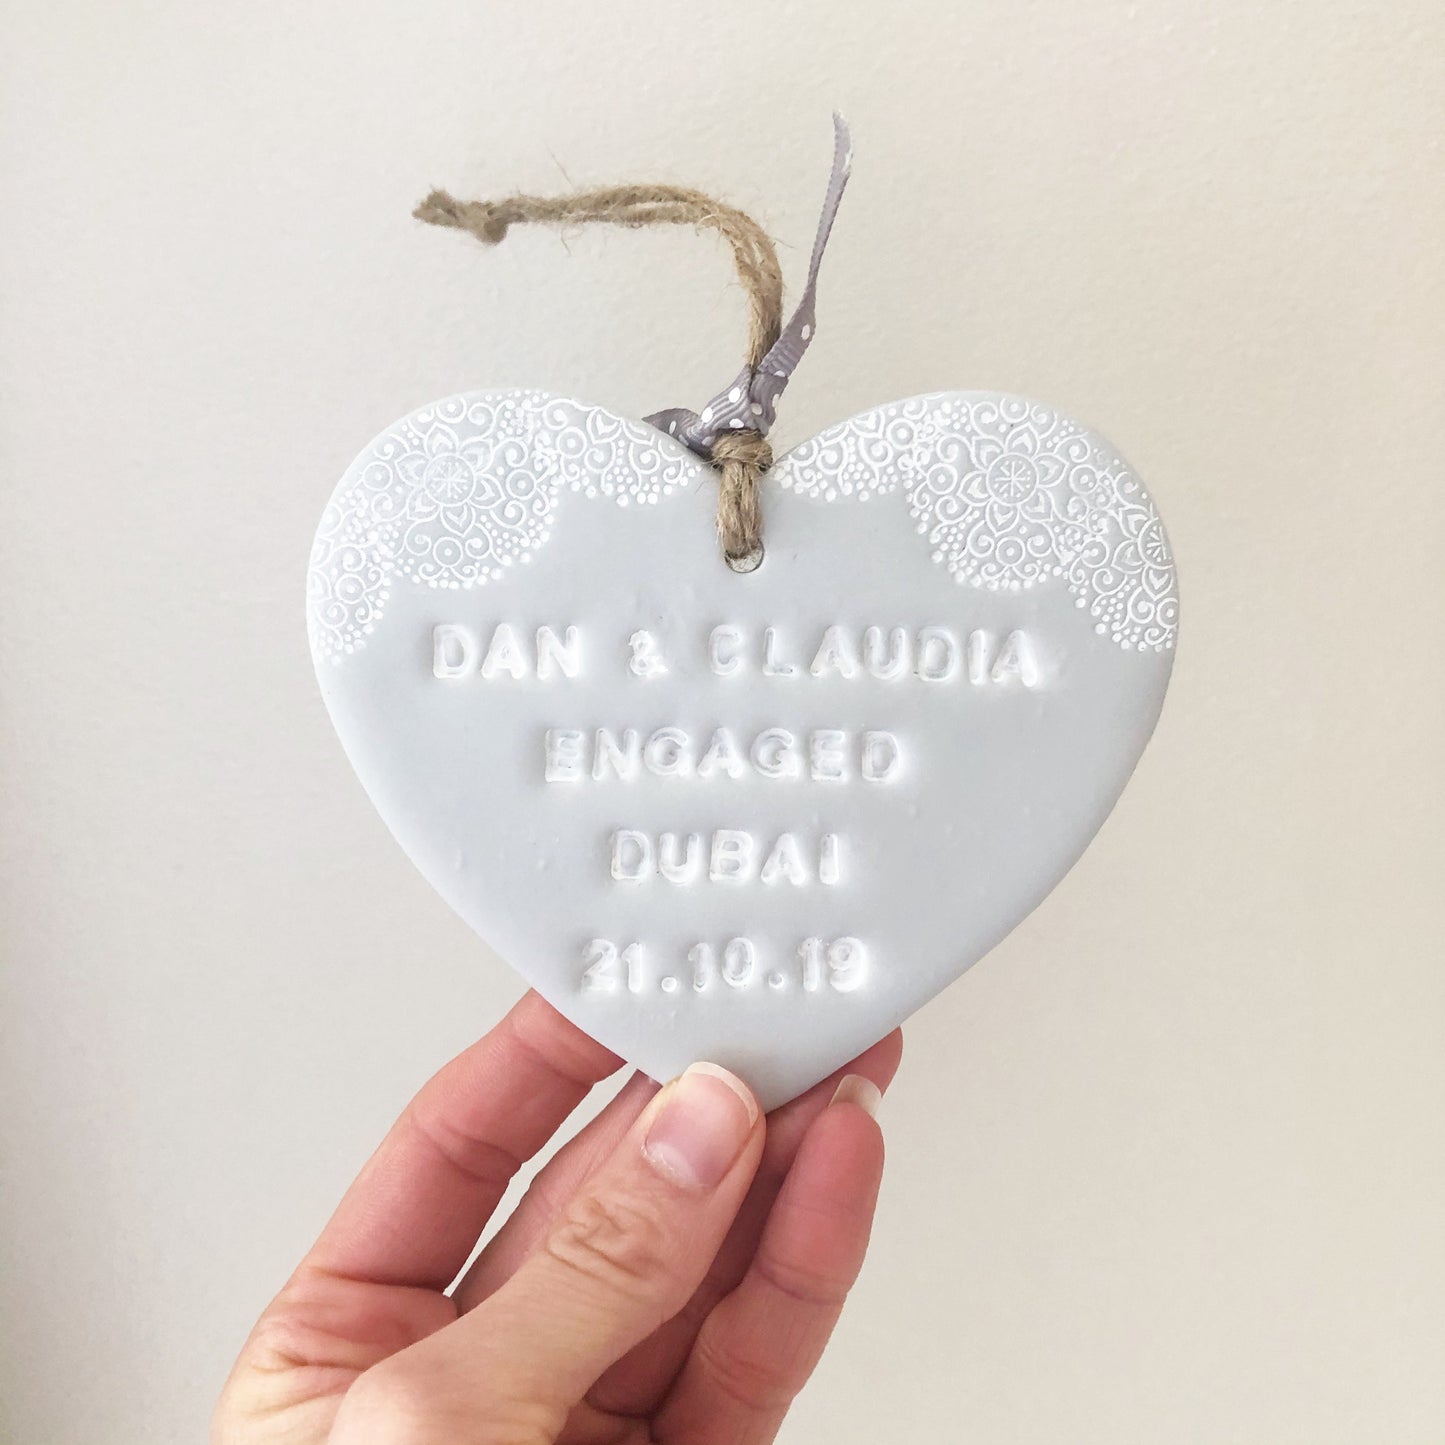 Personalised engaged abroad gift, grey clay heart with a white lace edge at the top of the heart with twine to hang, the heart is personalised with DAN & CLAUDIA ENGAGED DUBAI 21.10.19